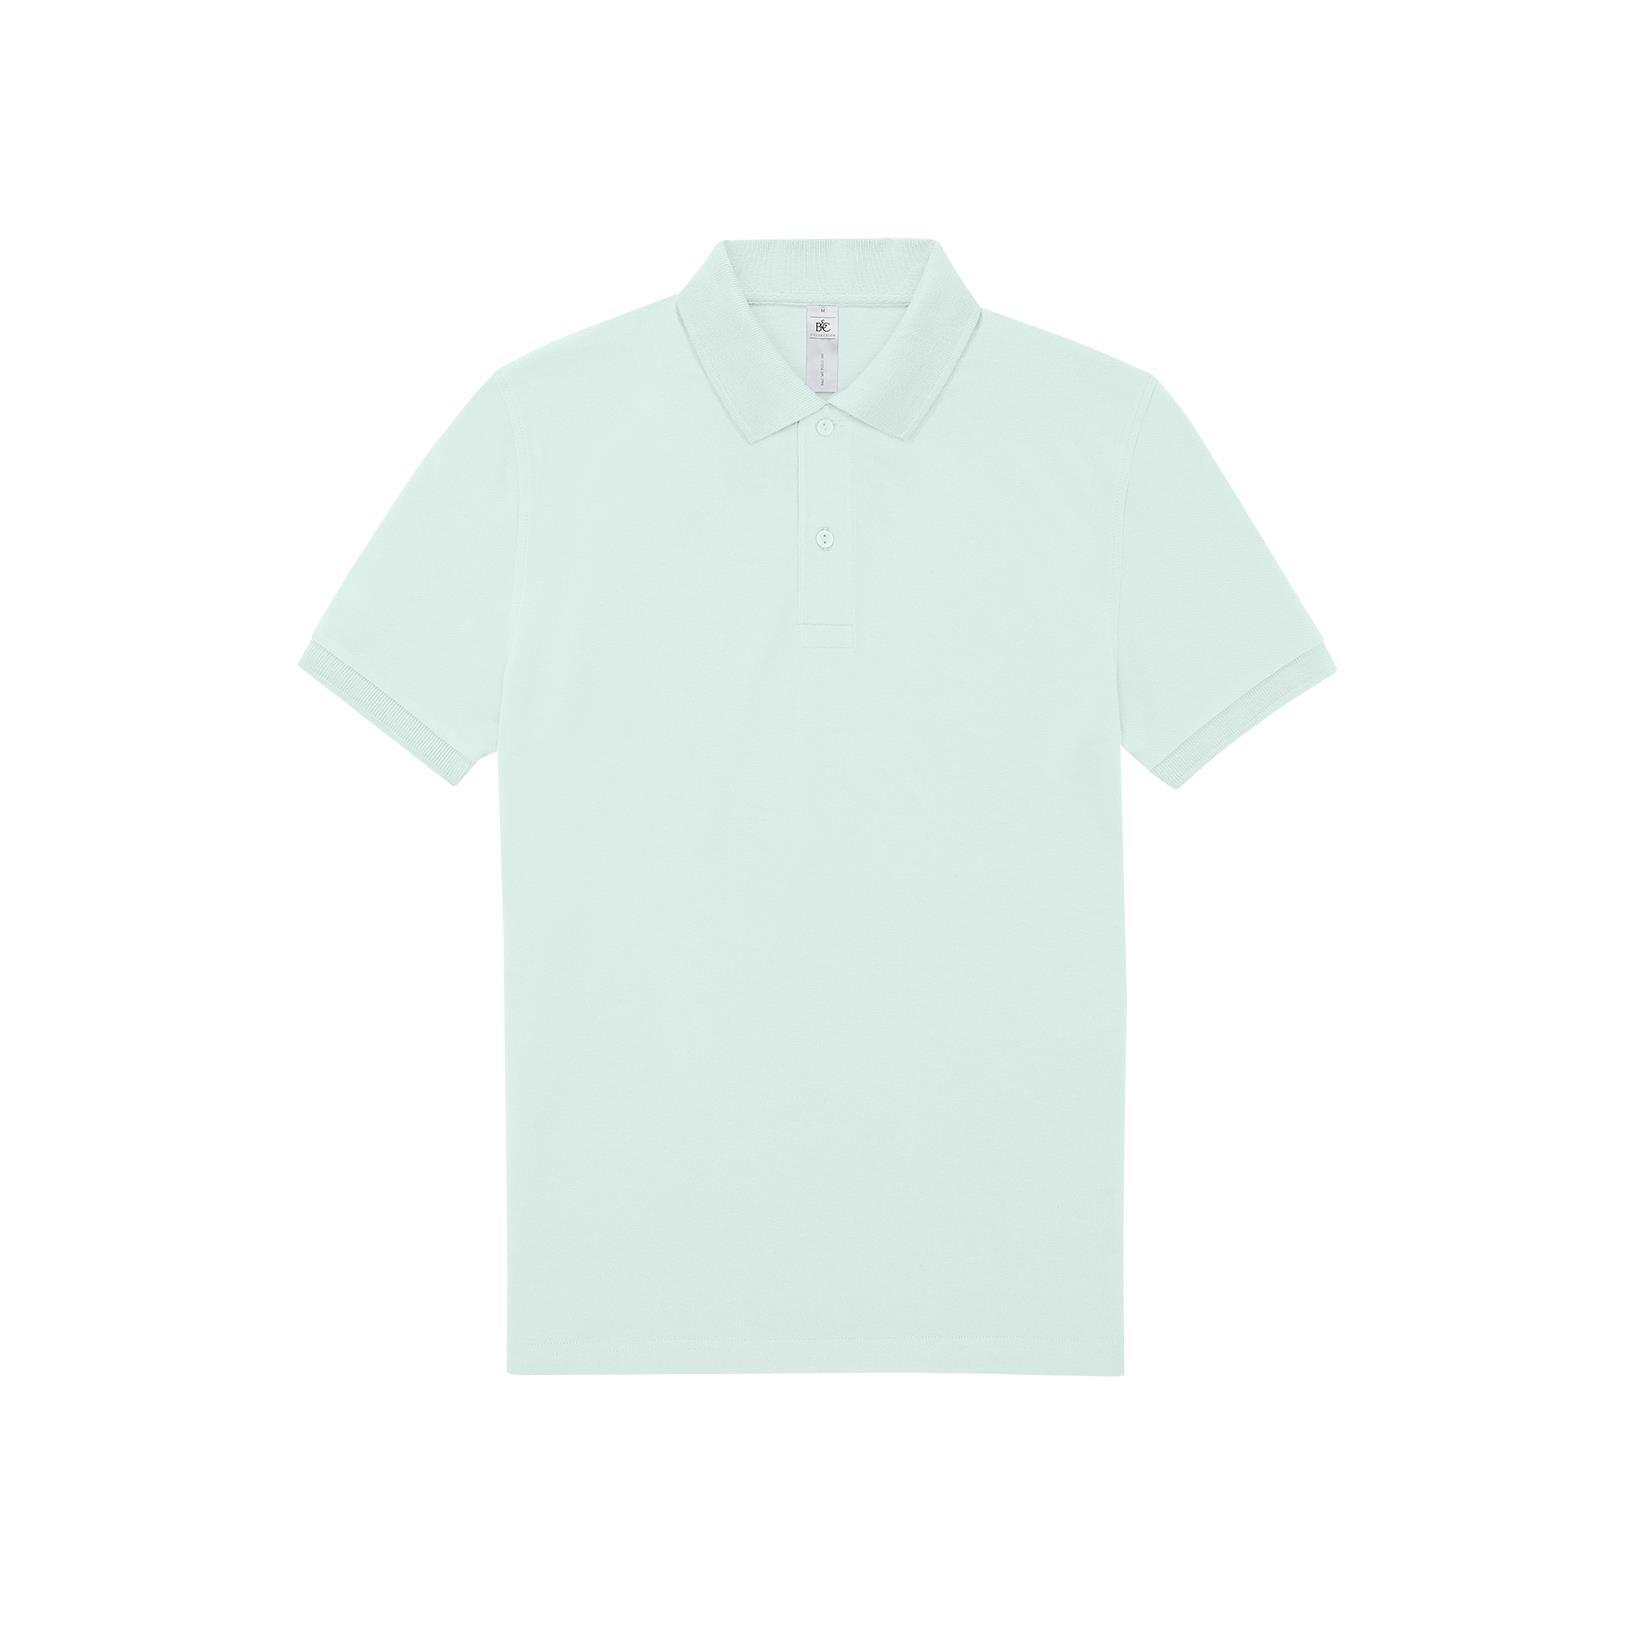 Polo voor mannen blush mint moderne polo